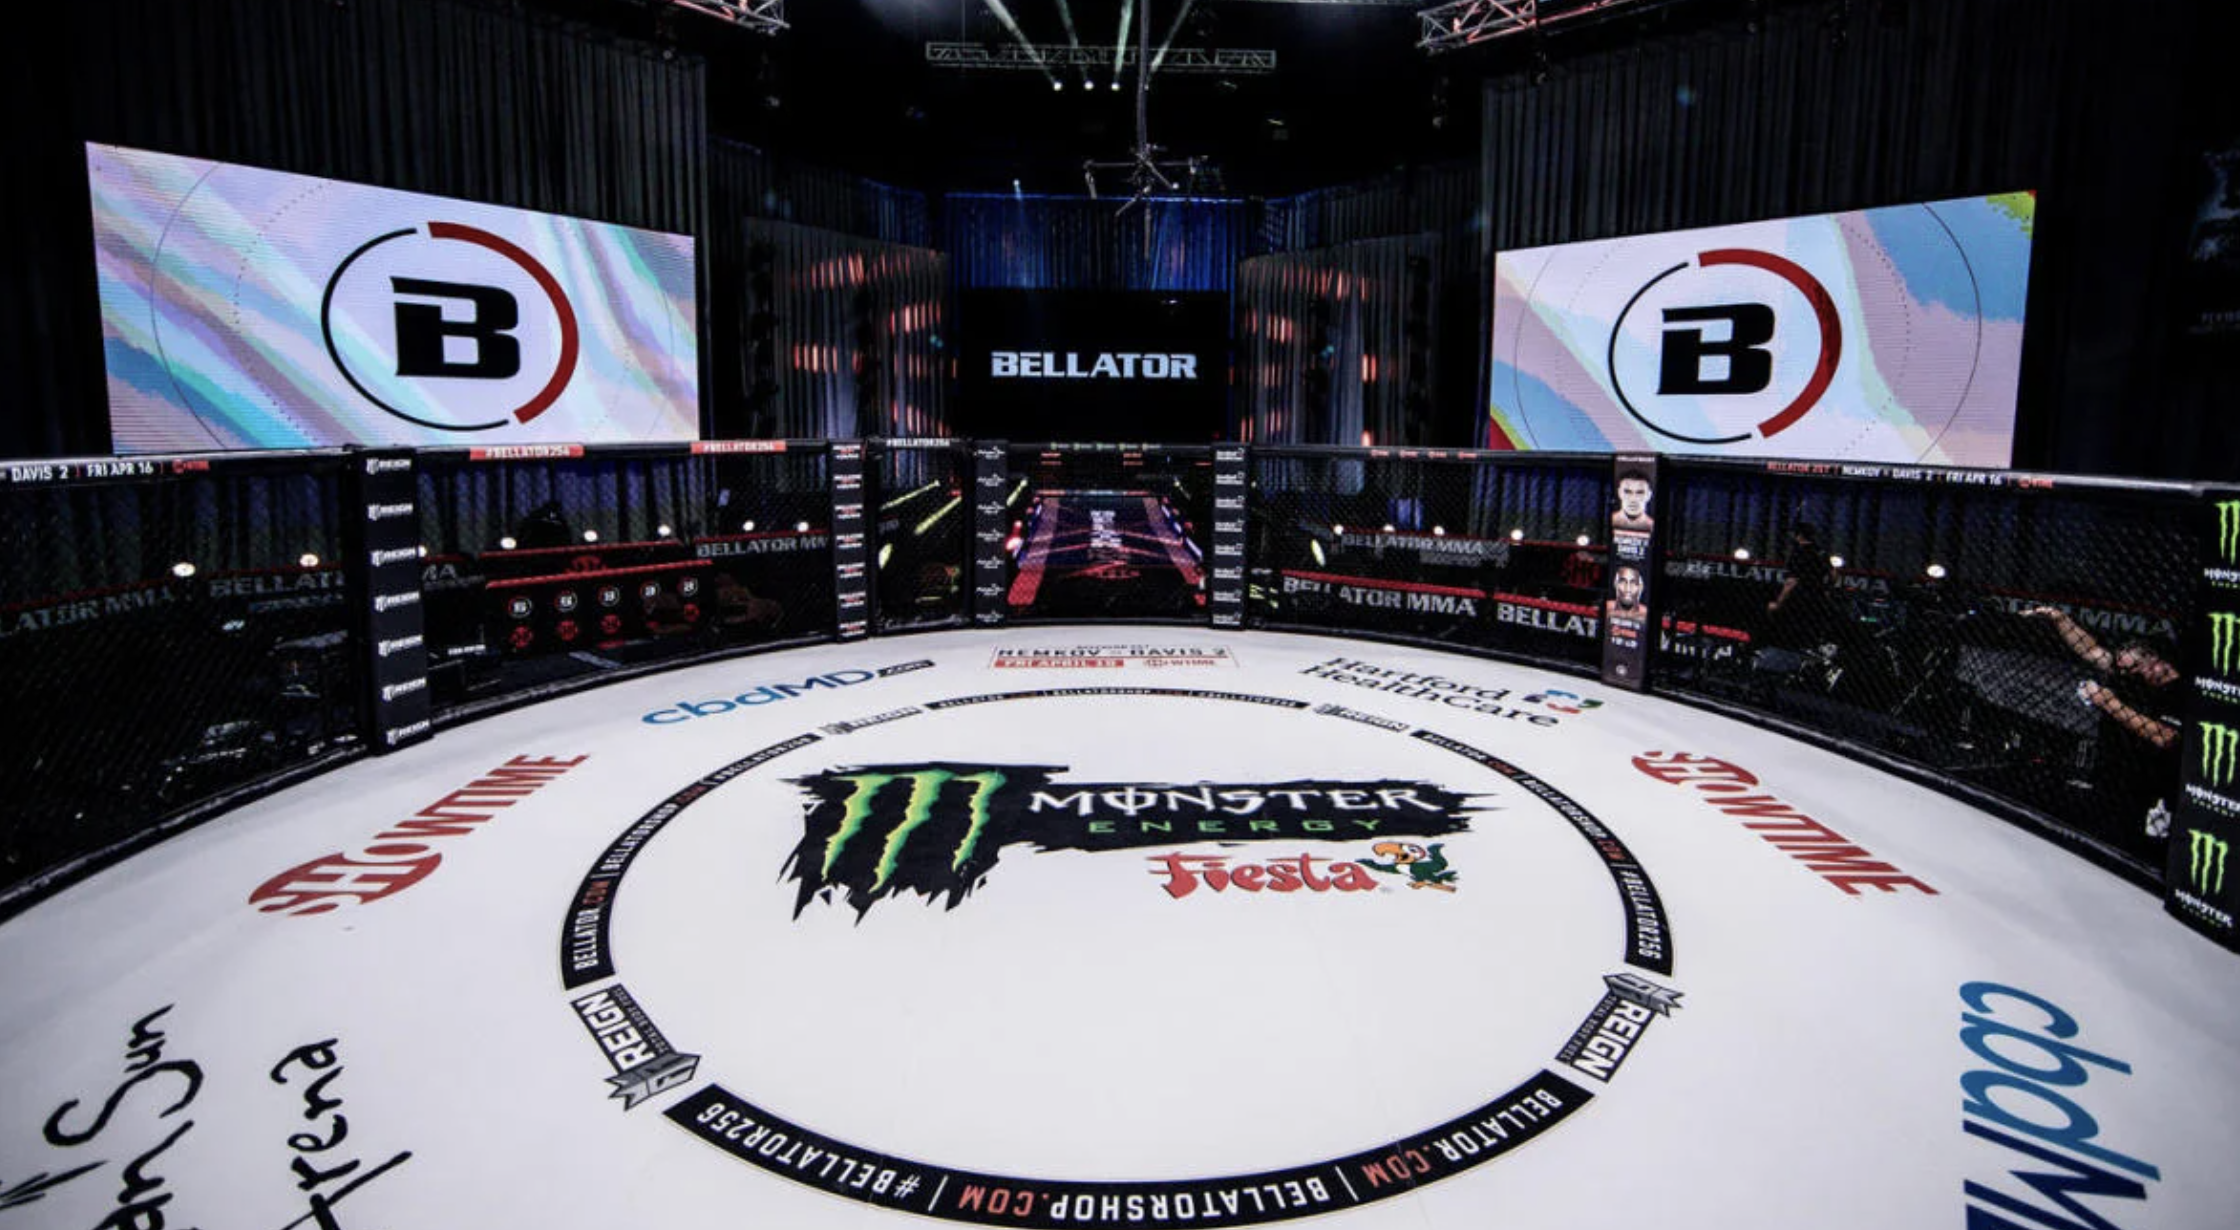 Bellator and MMA fanatics from around the world are always looking for a reliable method to stream the big fights online.